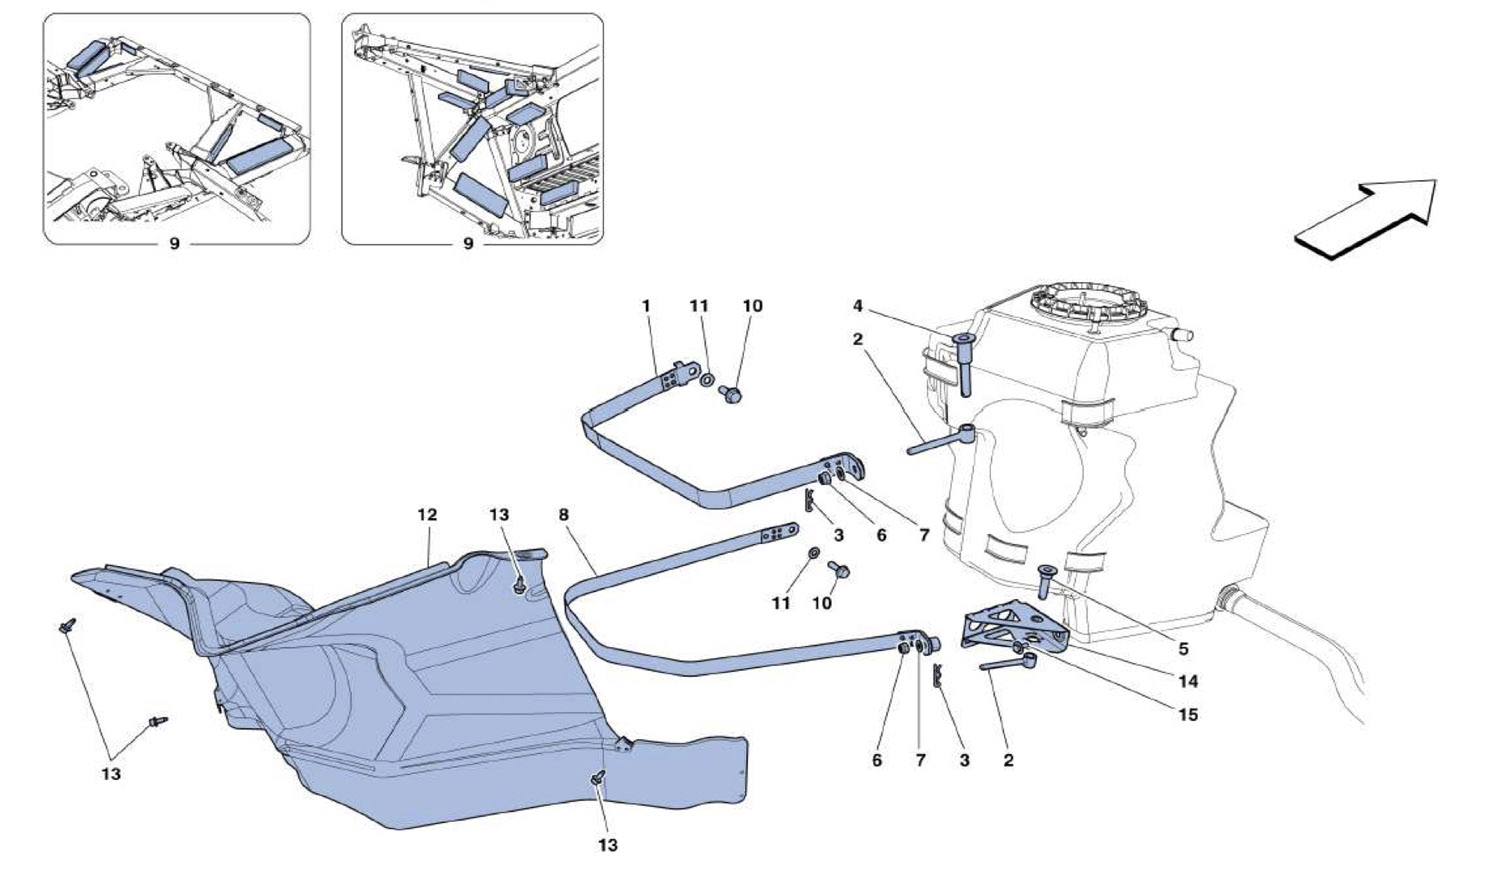 Schematic: Fuel Tanks Fixing And Protection